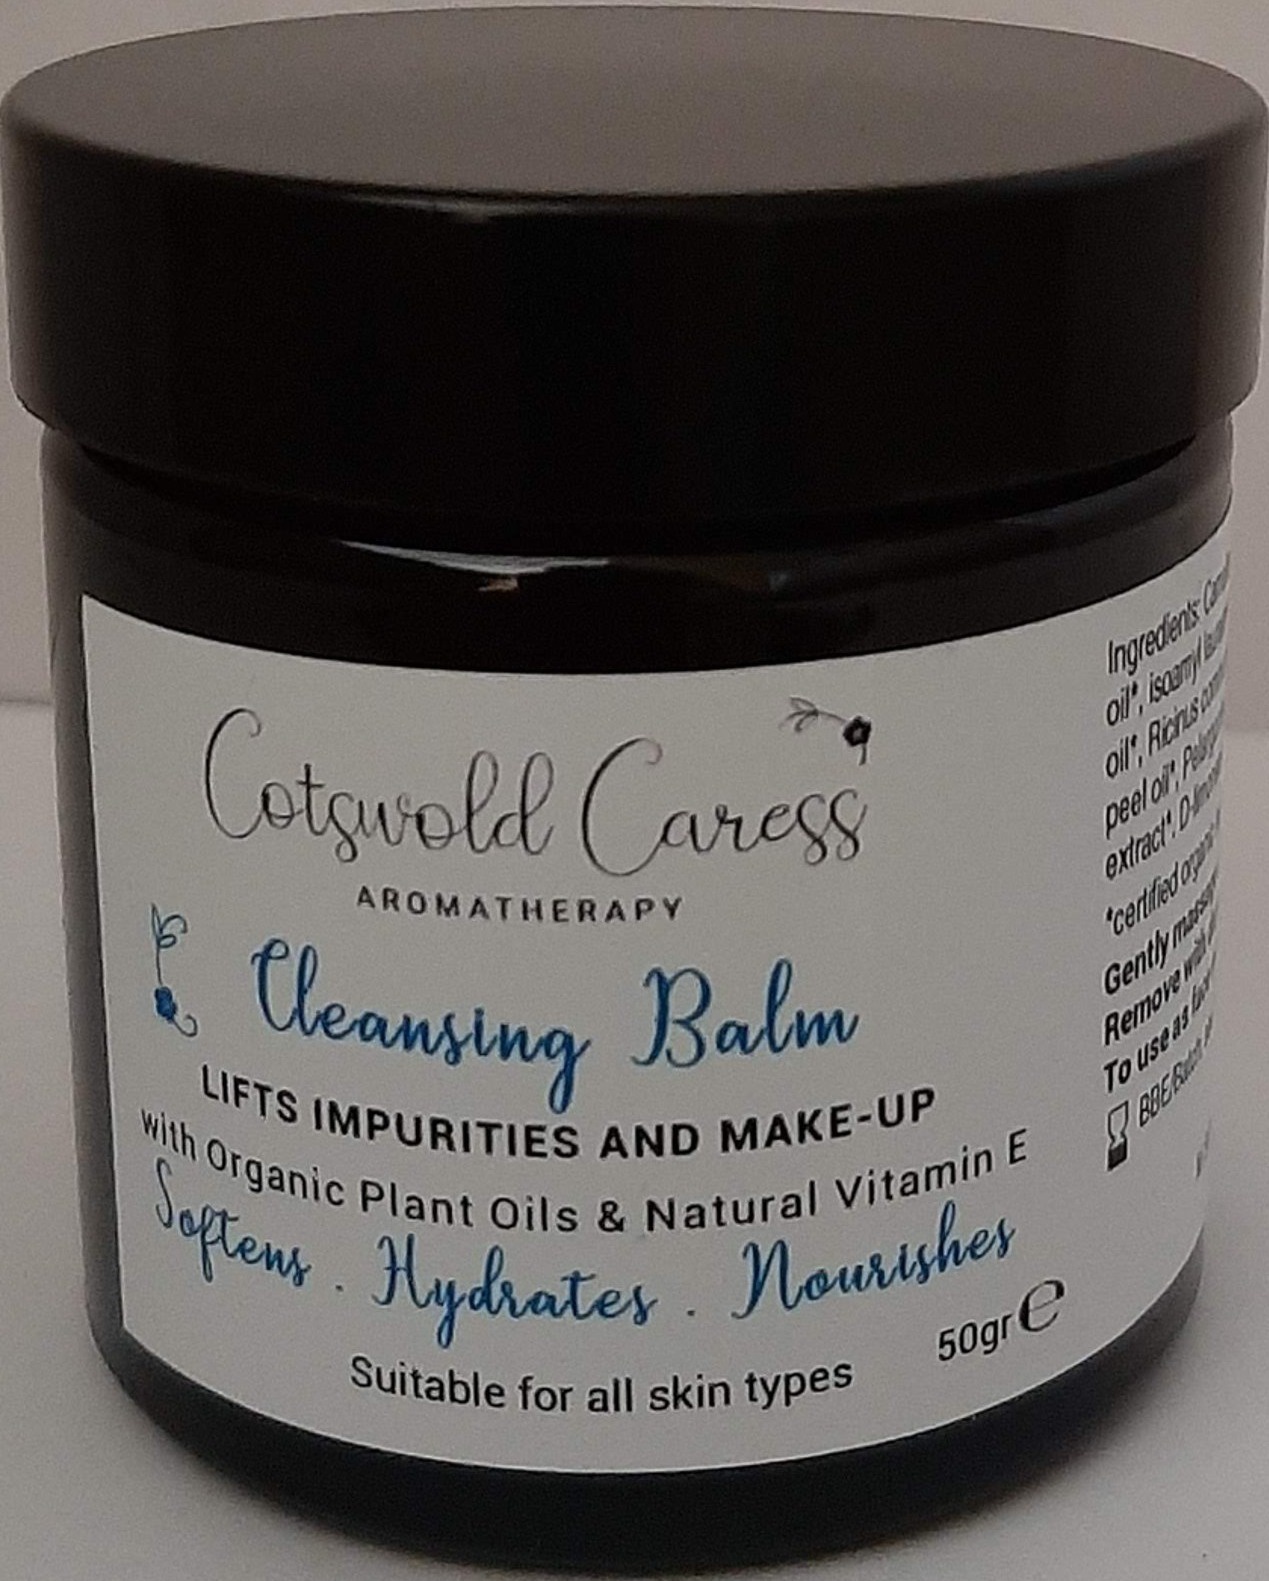 Cotswold Caress Cleansing Balm